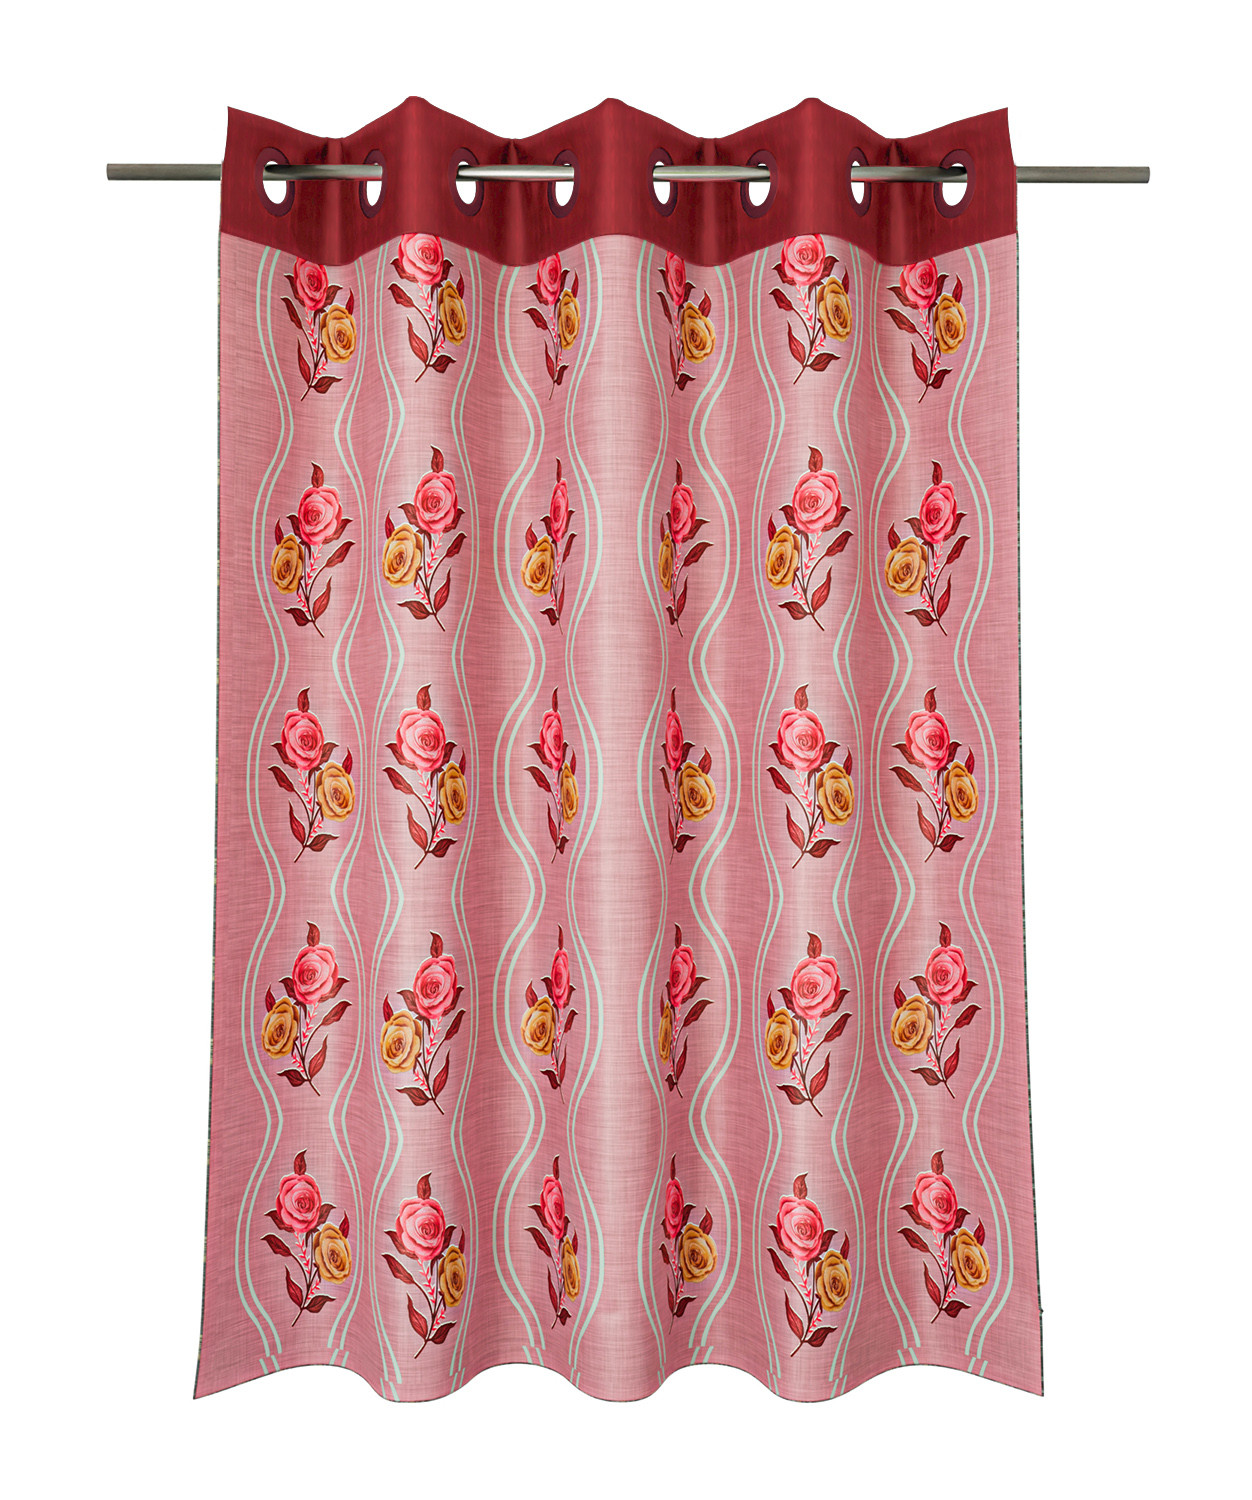 Kuber Industries Polyester Decorative 9 Feet Long Door Curtain | Rose Print Blackout Drapes Curtain With 8 Eyelet For Home & Office (Pink)